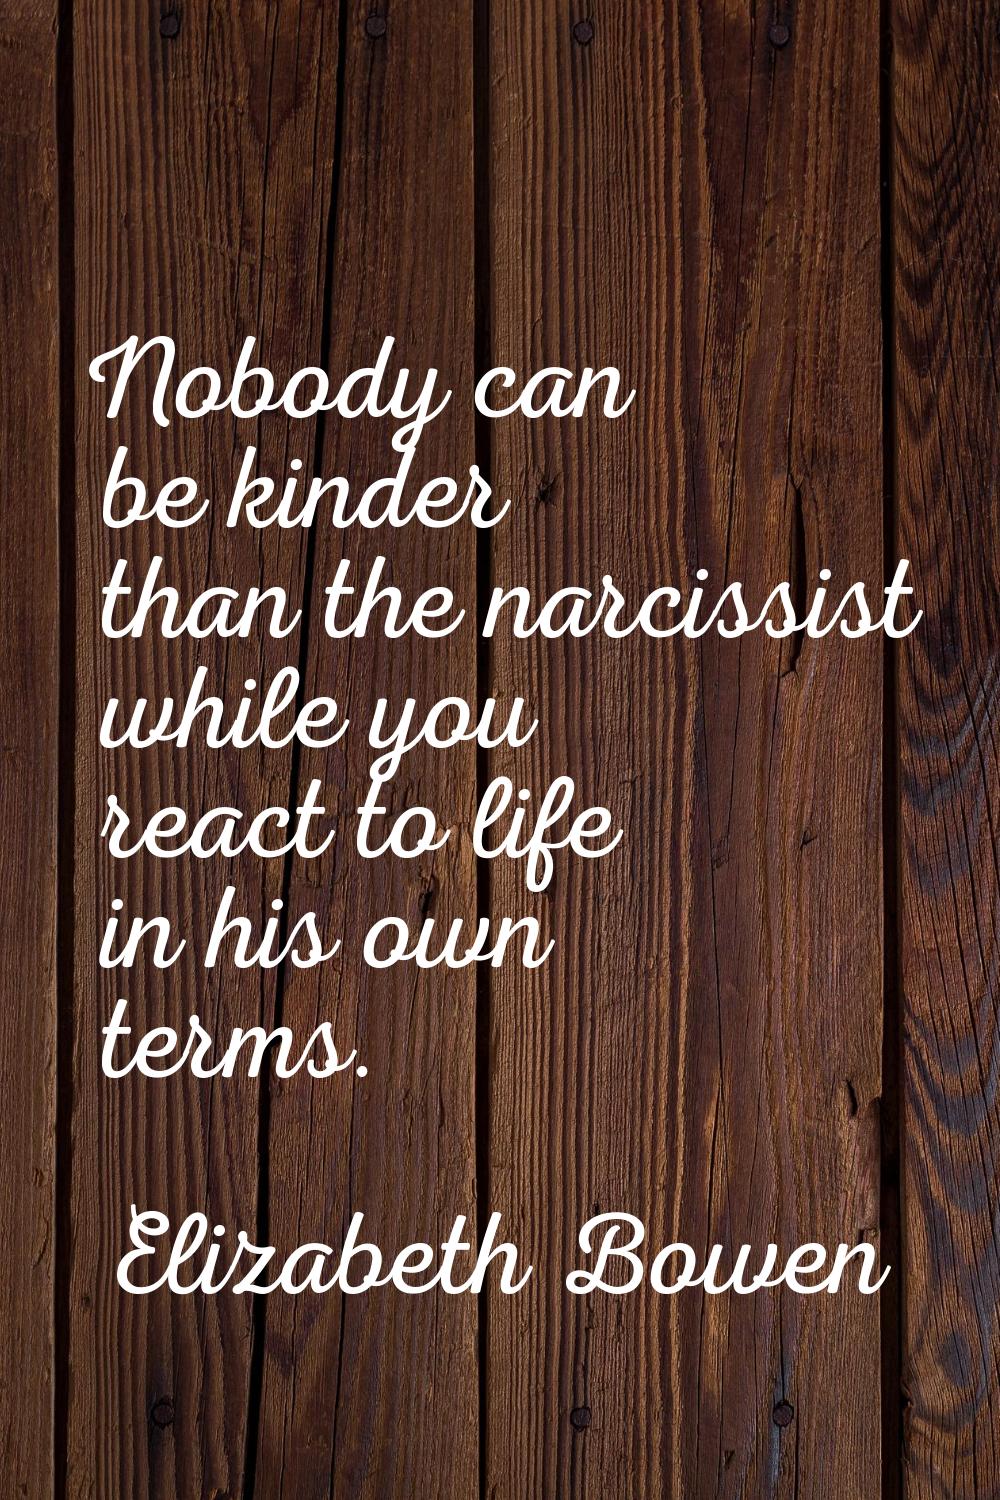 Nobody can be kinder than the narcissist while you react to life in his own terms.